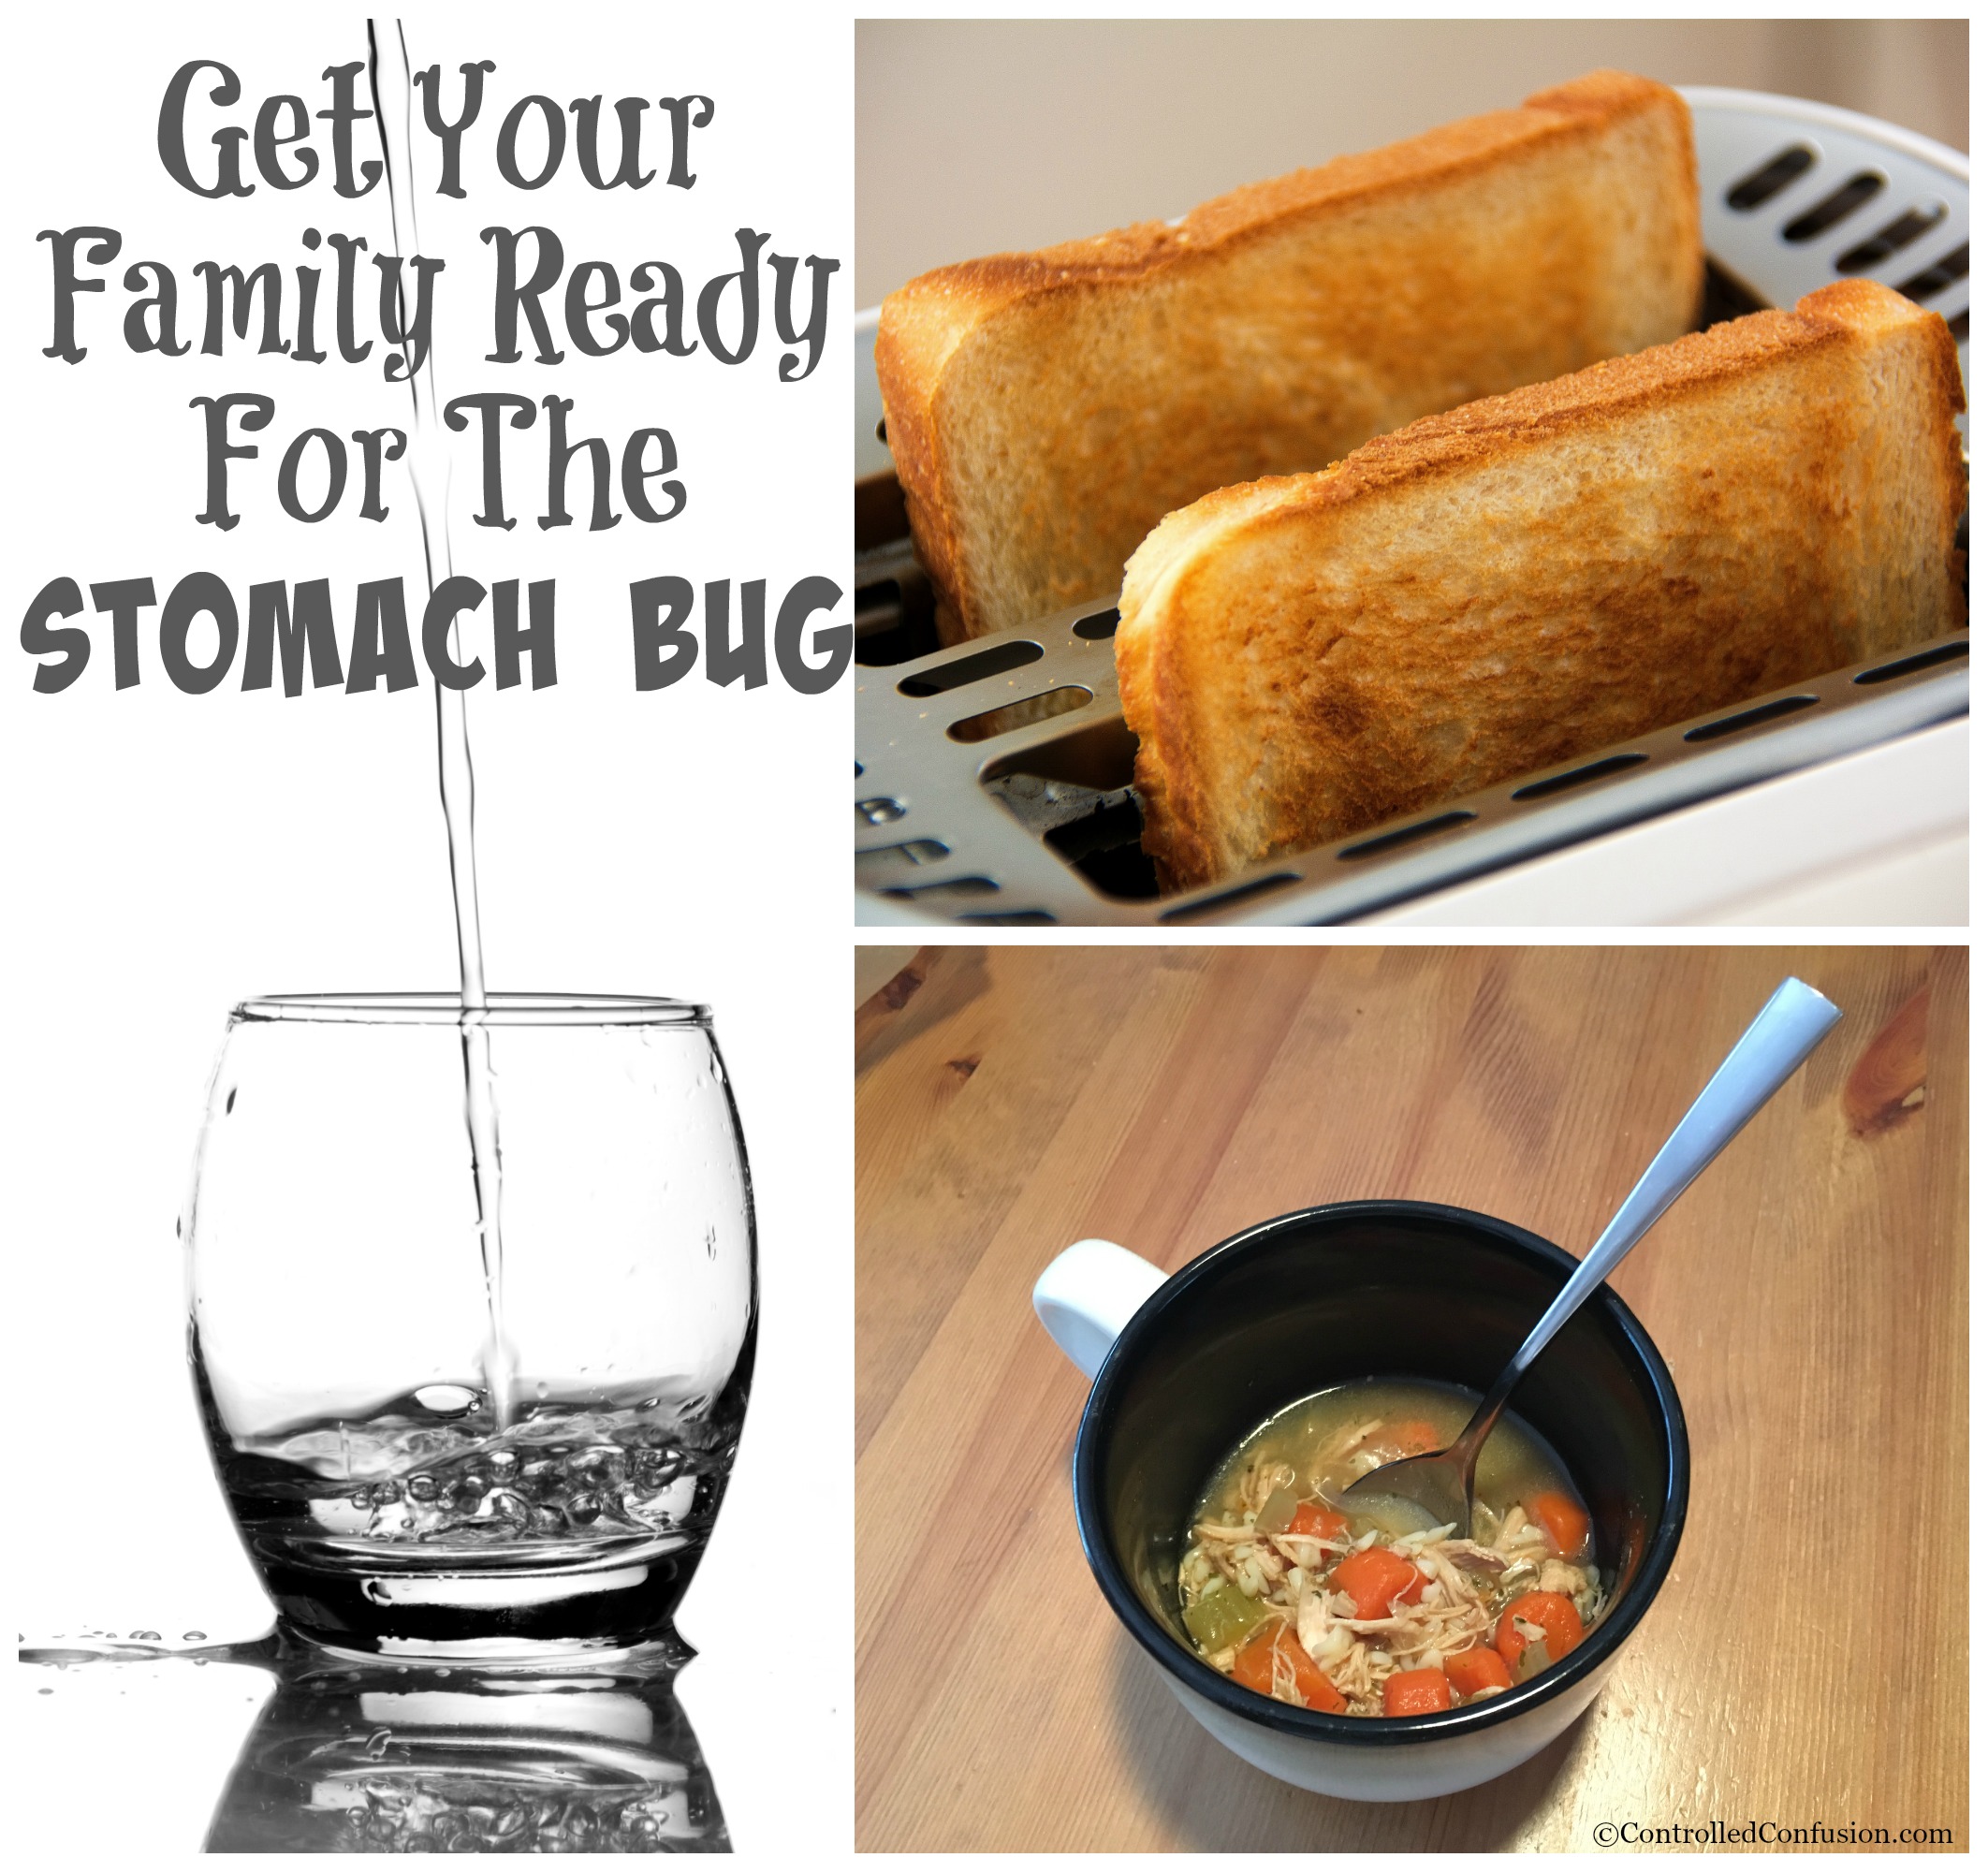 Get Your Family Ready For The Stomach Bug